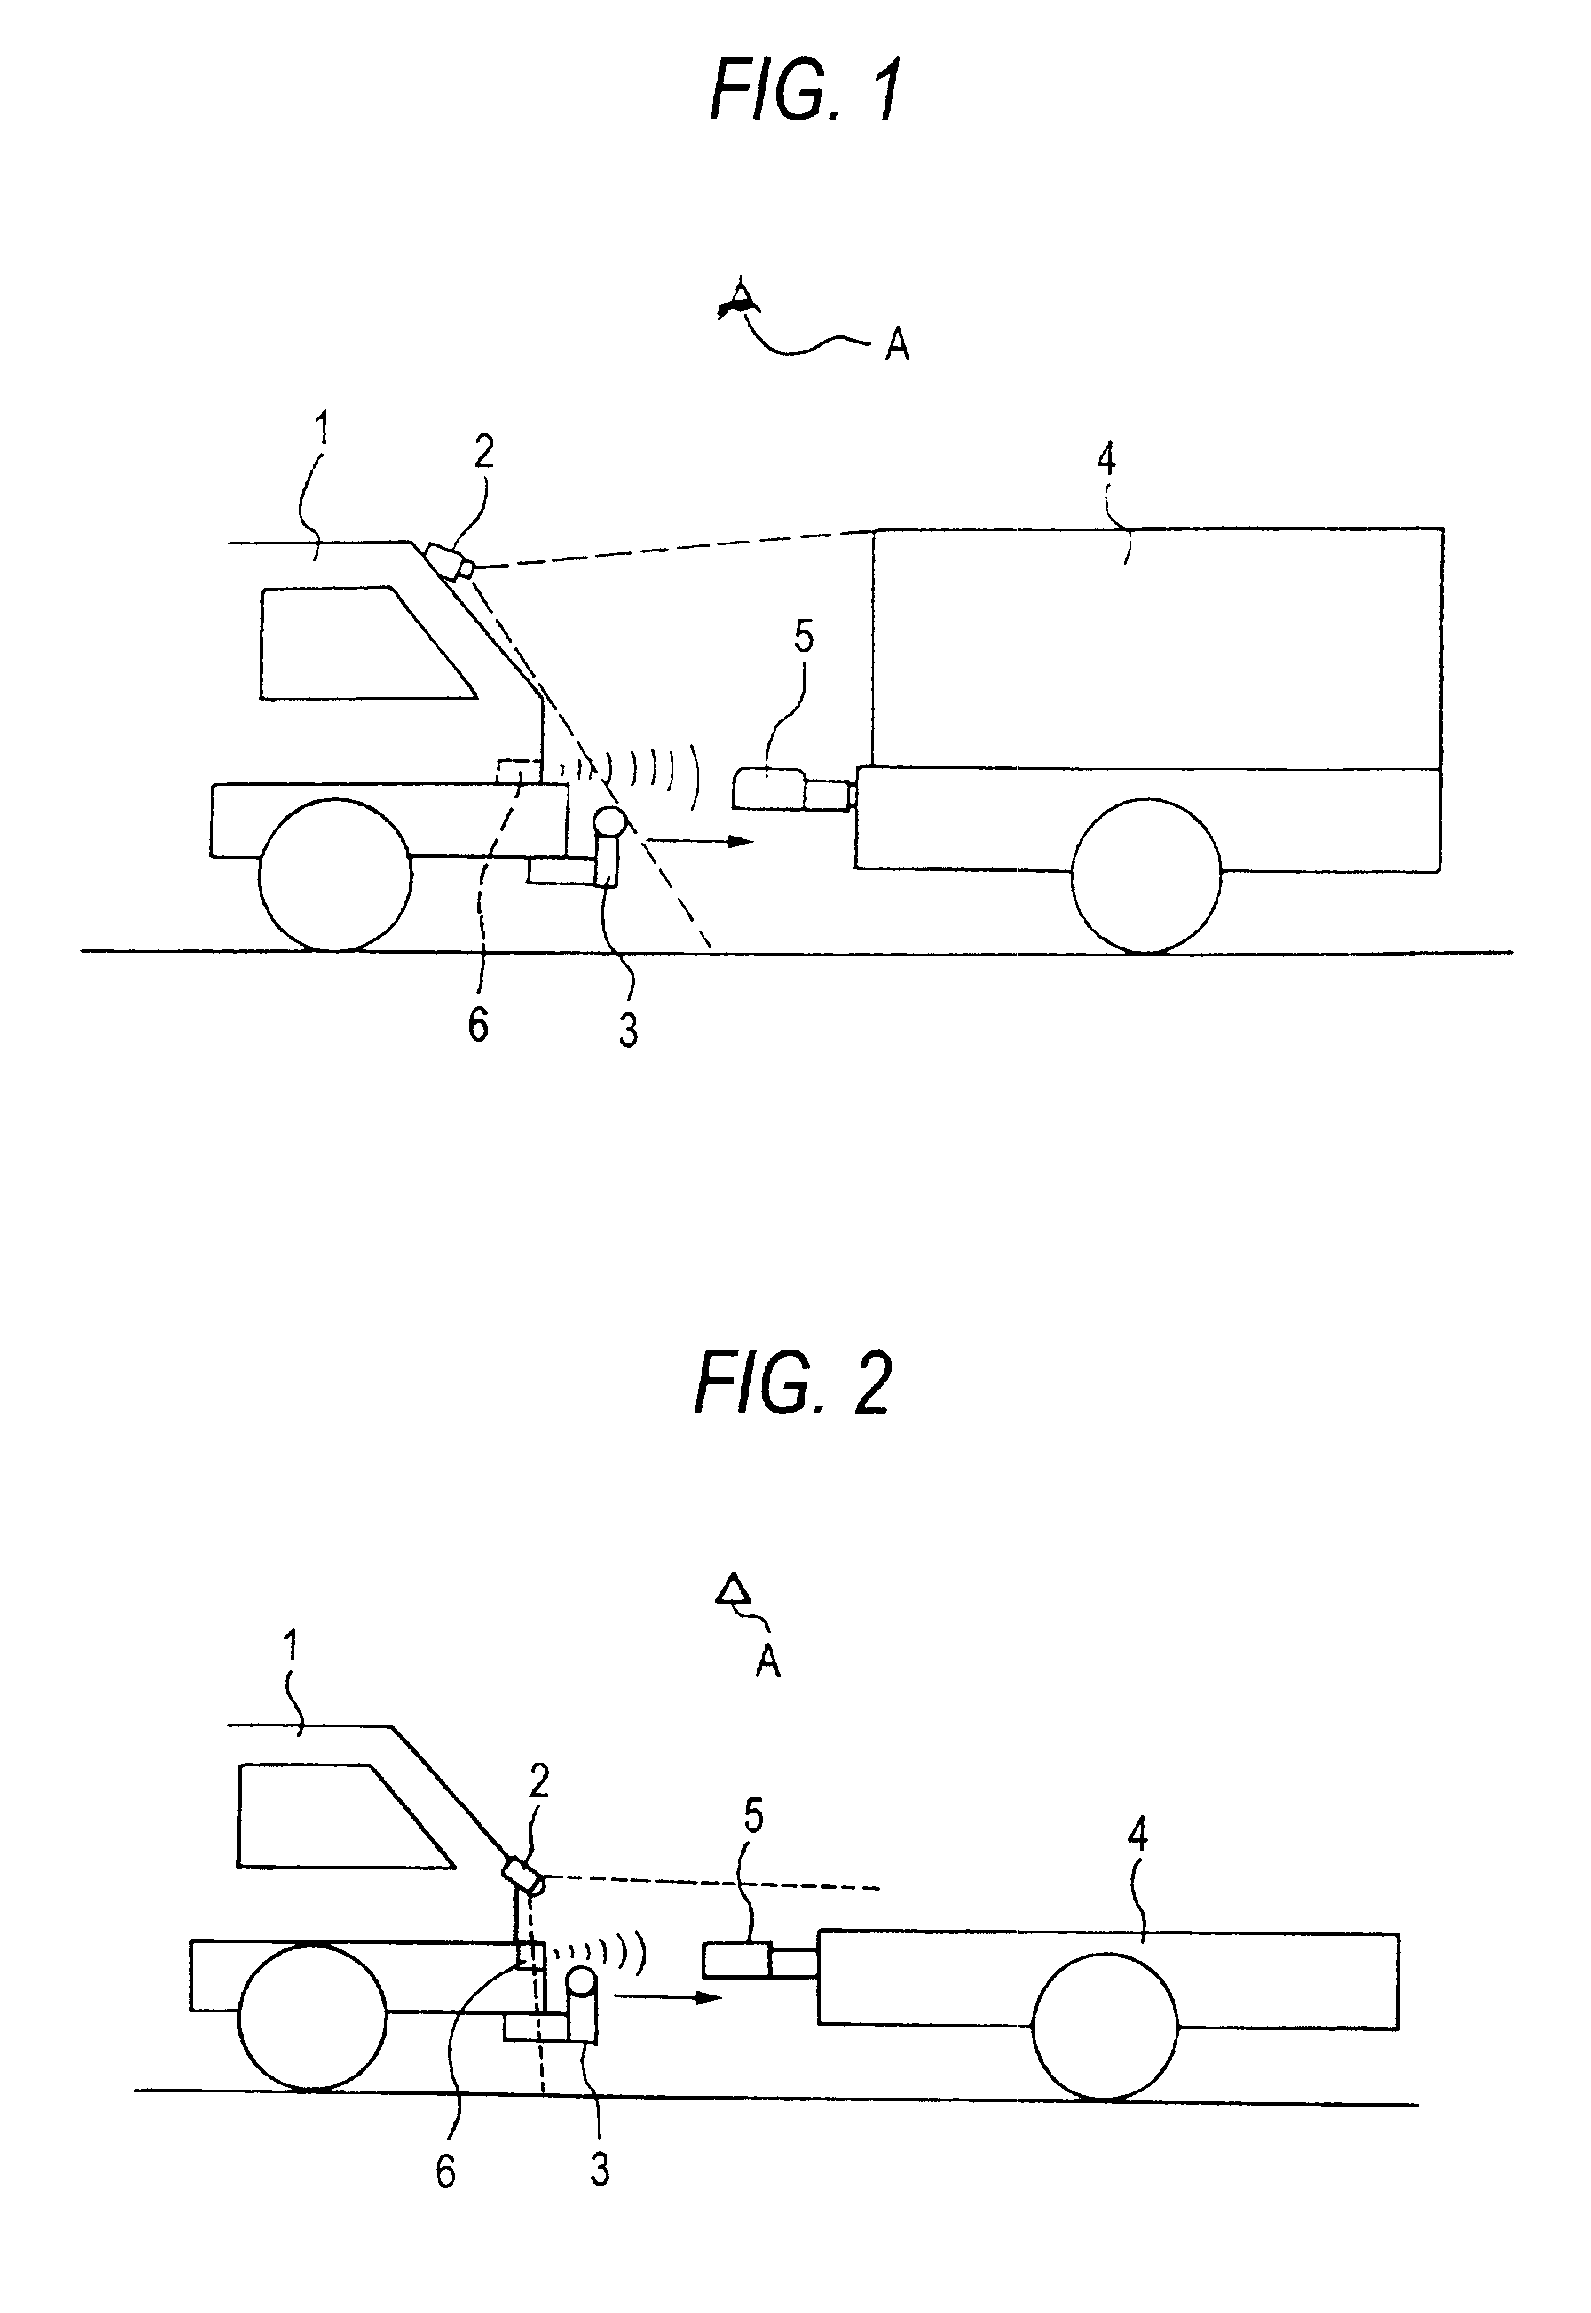 Image display method and apparatus for rearview system